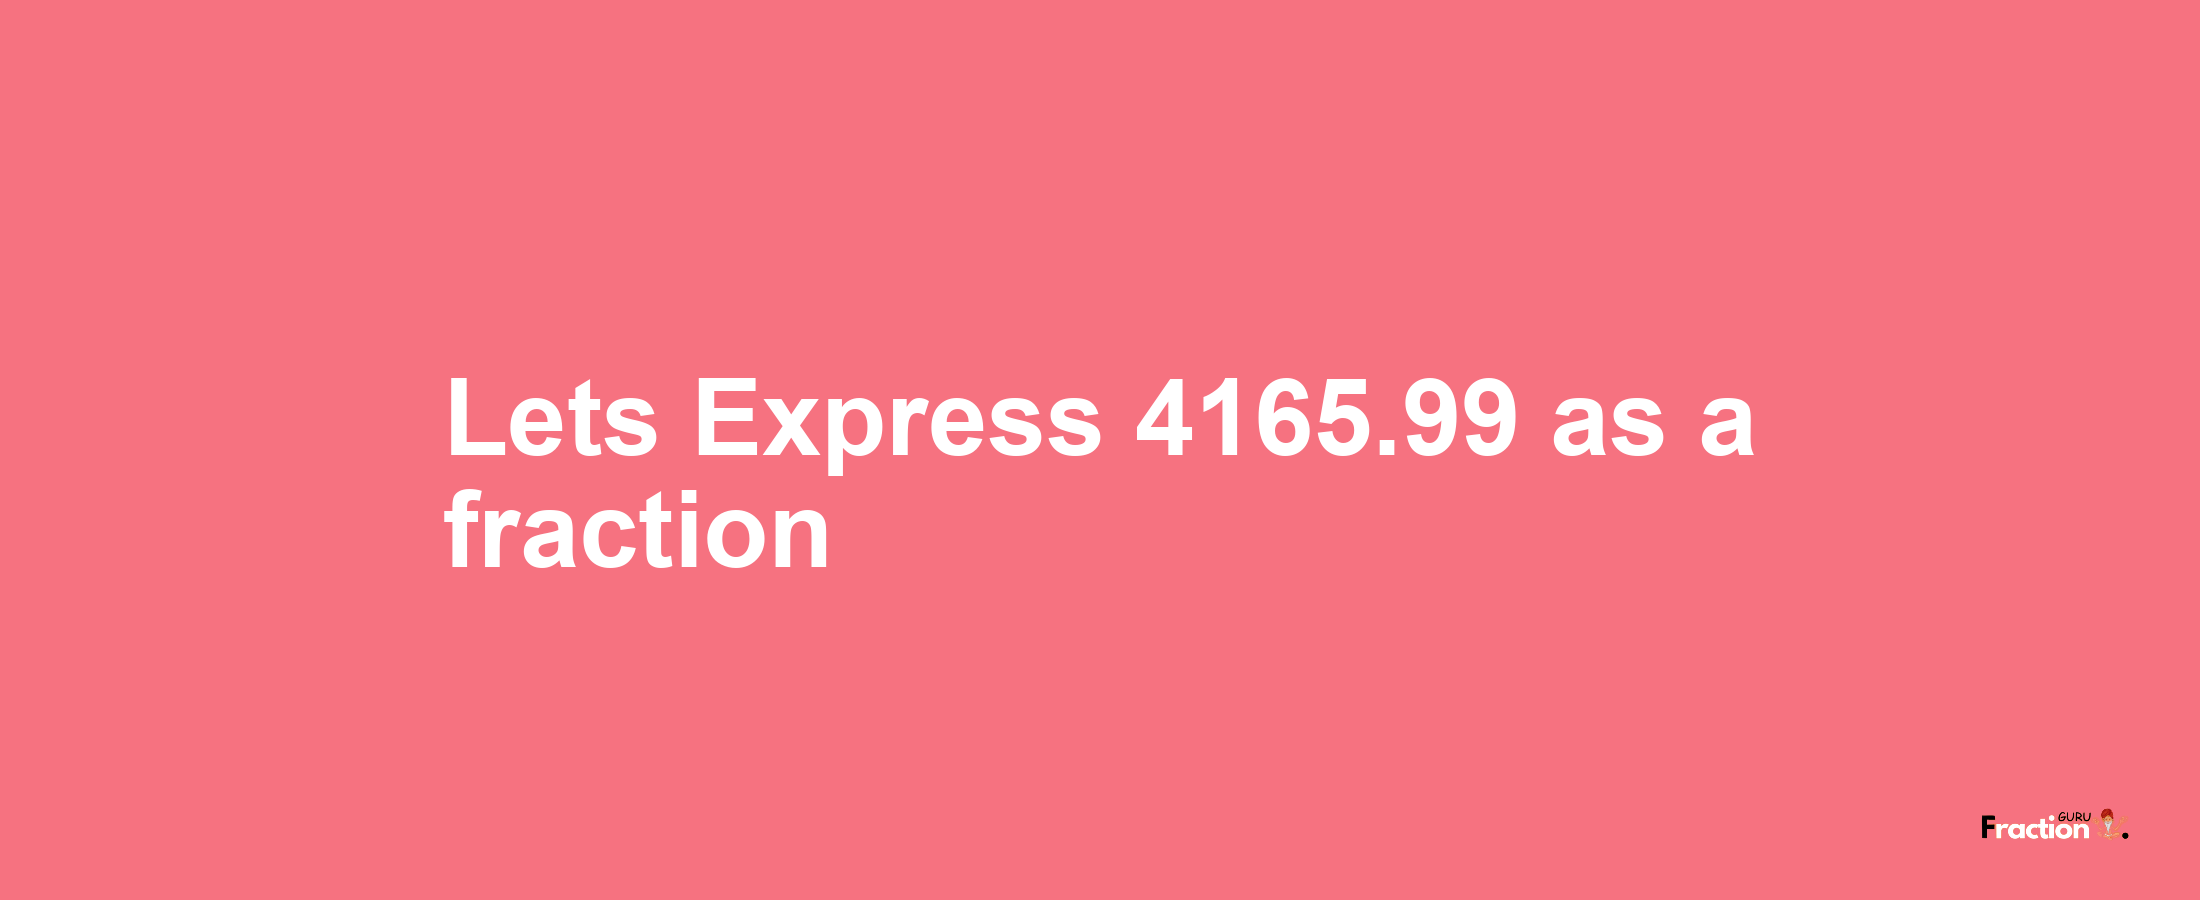 Lets Express 4165.99 as afraction